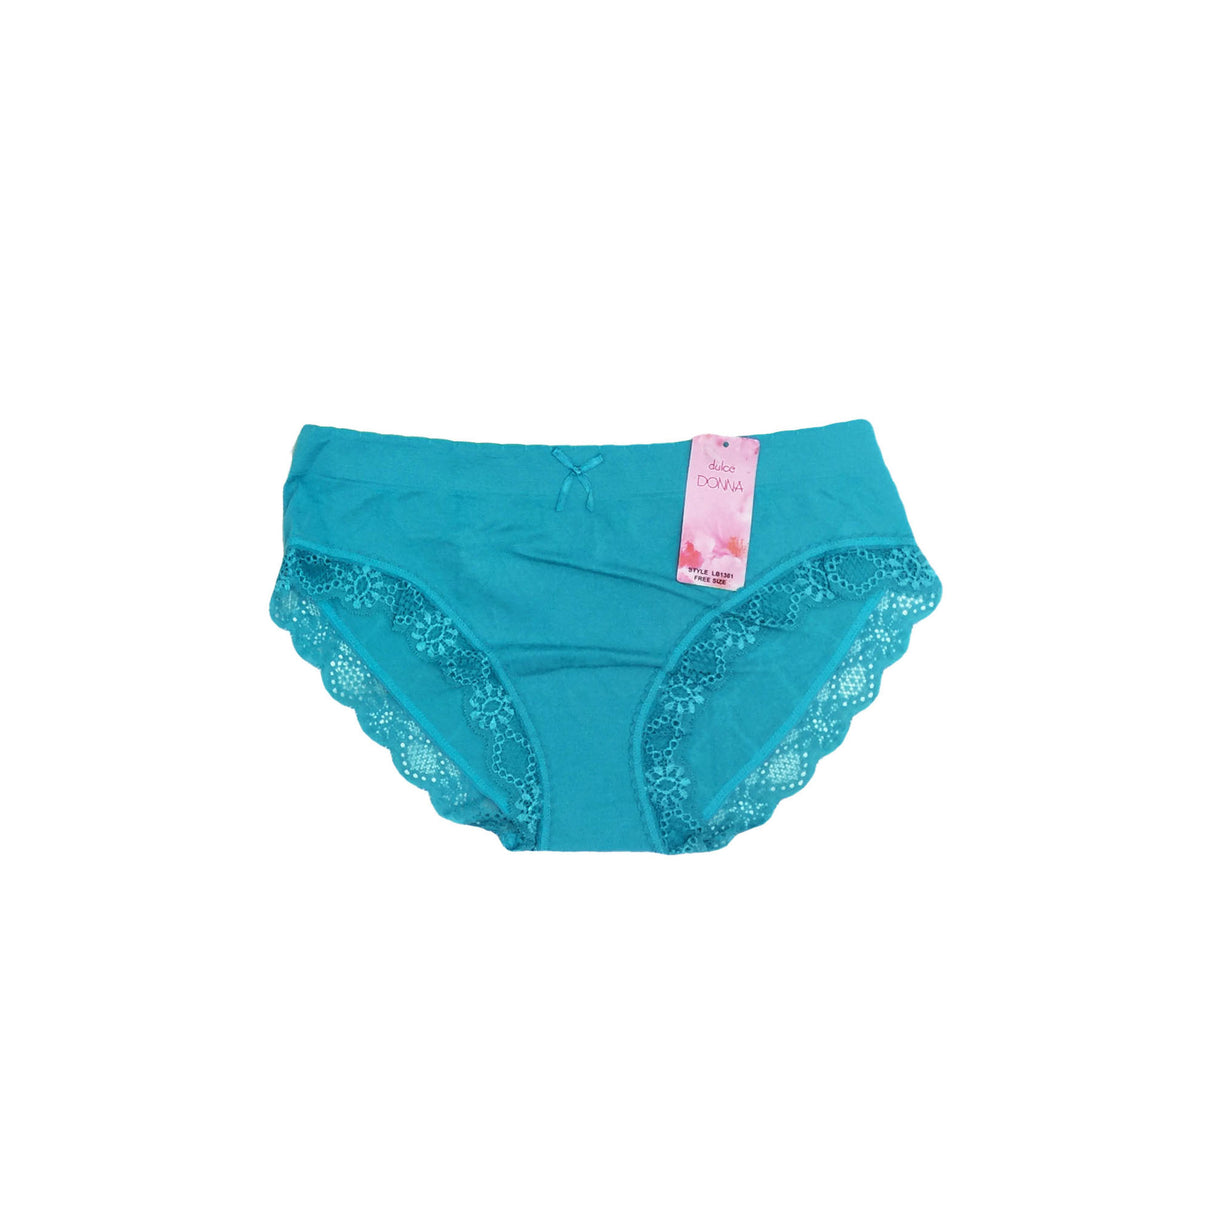 Dulce Donna, Panties de Mujer, Free Size